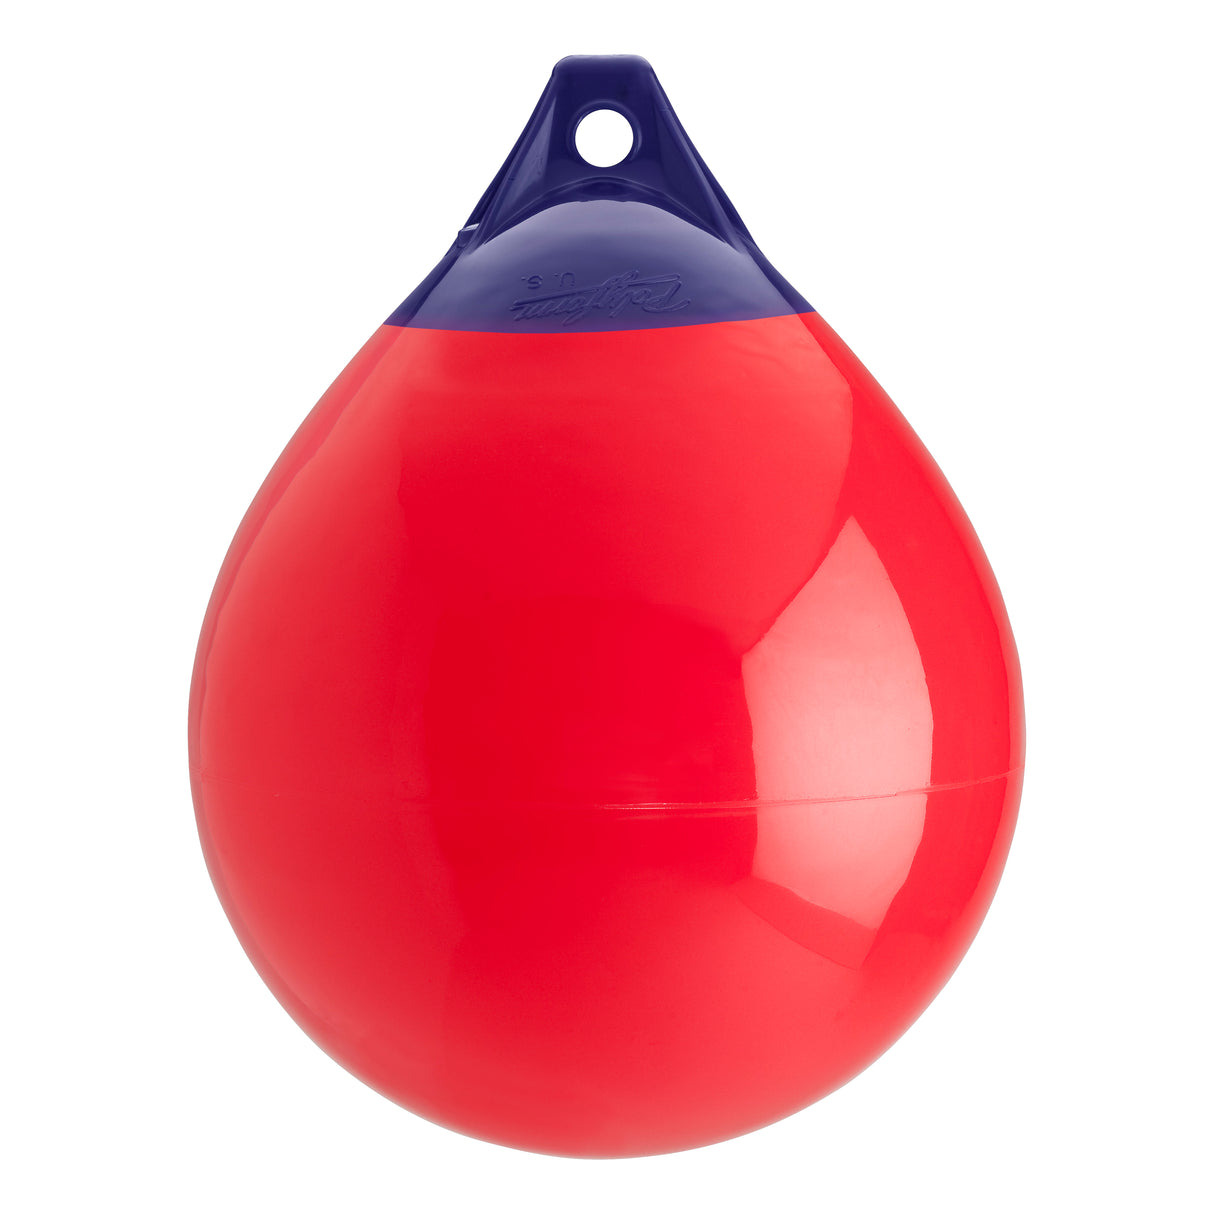 Red inflatable buoy, Polyform A-3 